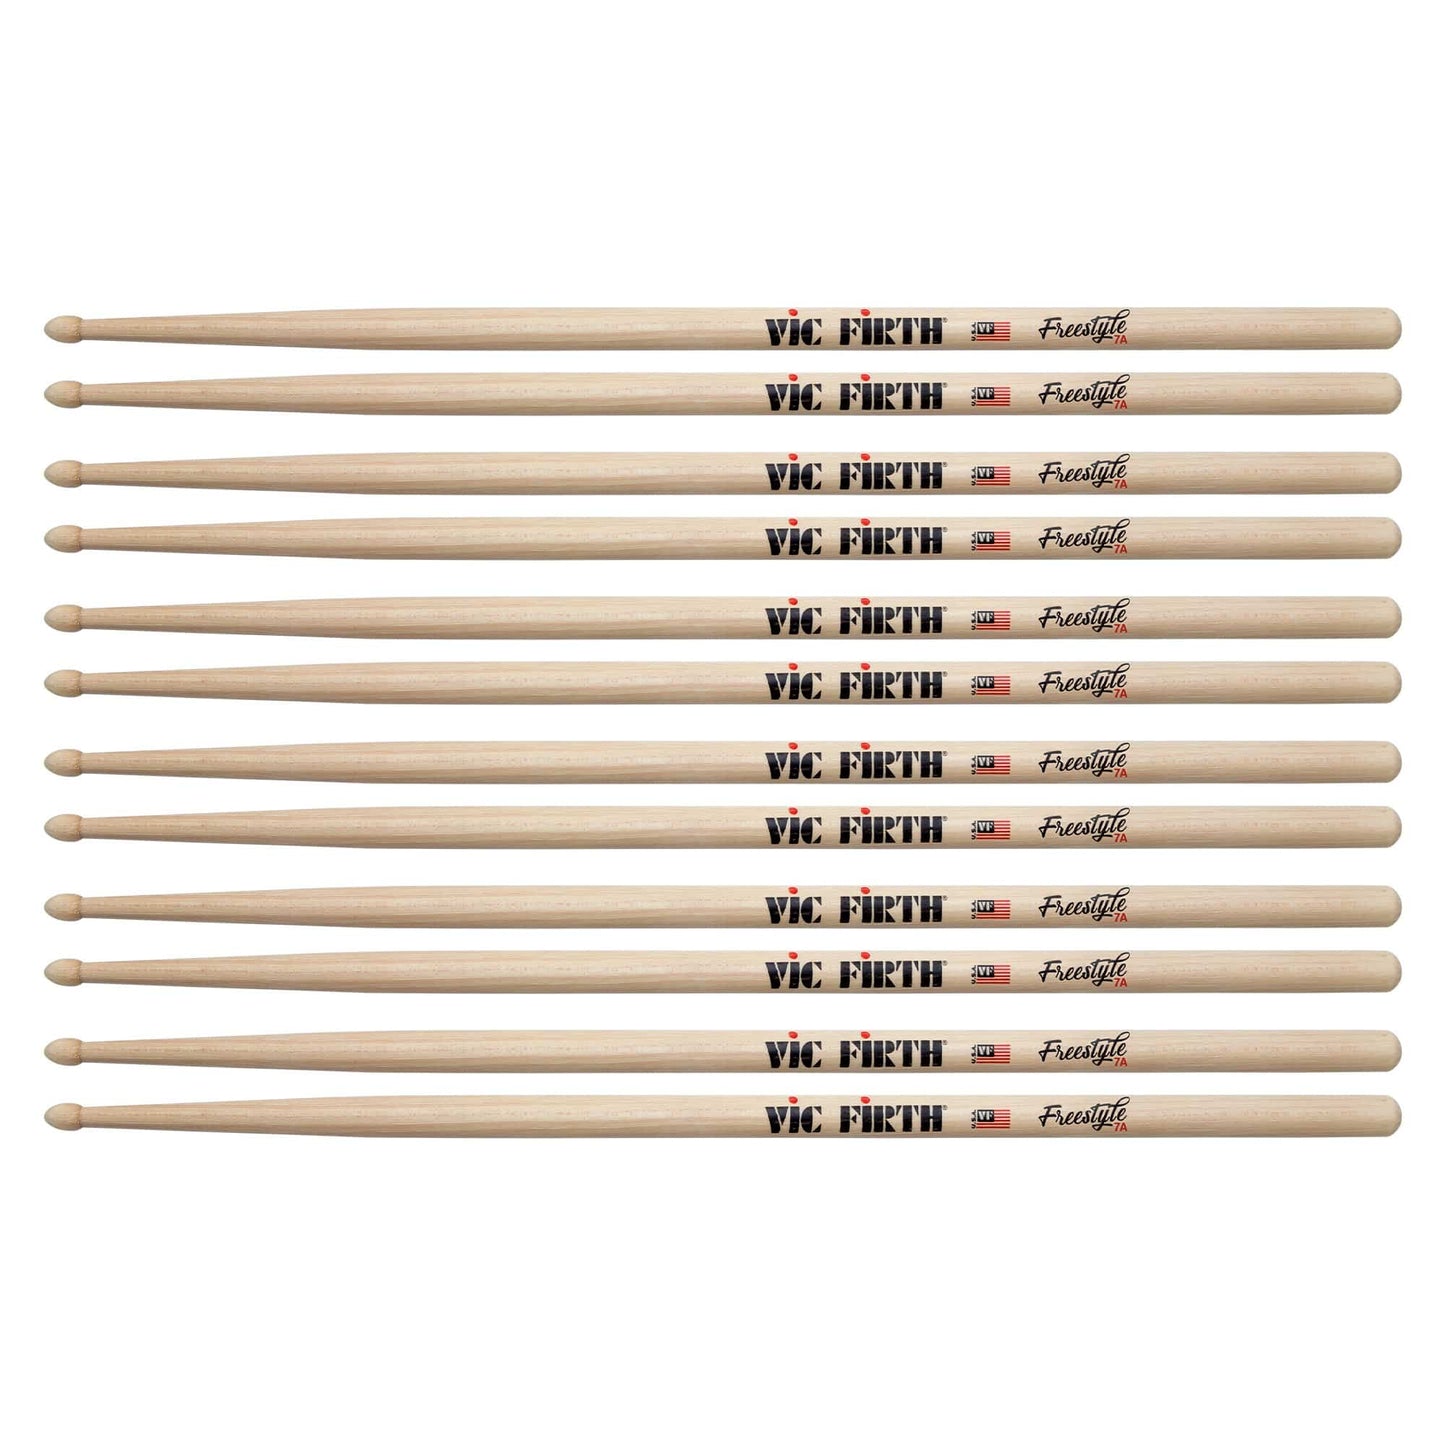 Vic Firth American Concept Freestyle 7A Wood Tip Drum Sticks (6 Pair Bundle) Drums and Percussion / Parts and Accessories / Drum Sticks and Mallets